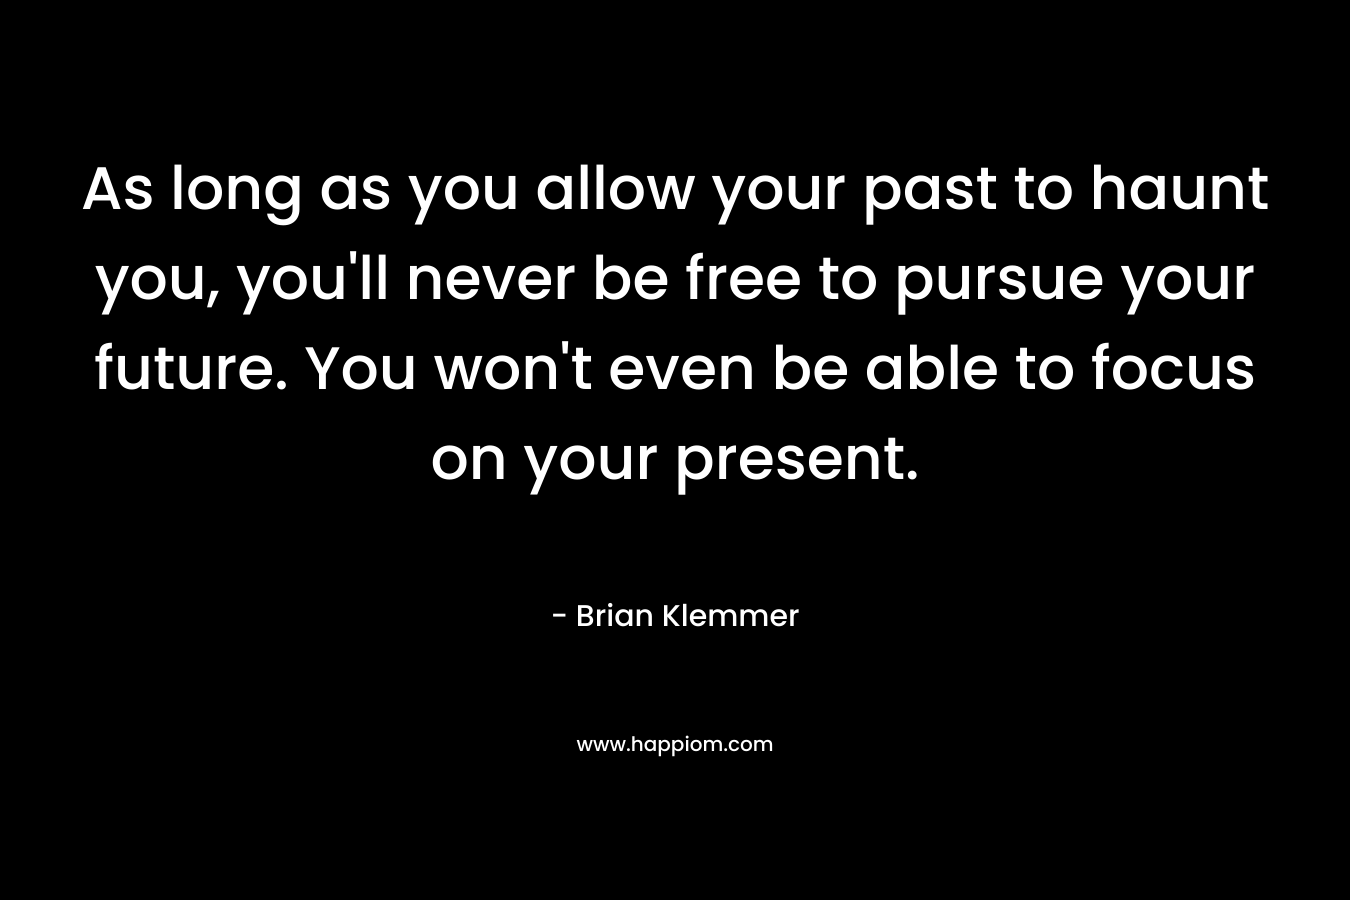 As long as you allow your past to haunt you, you'll never be free to pursue your future. You won't even be able to focus on your present.